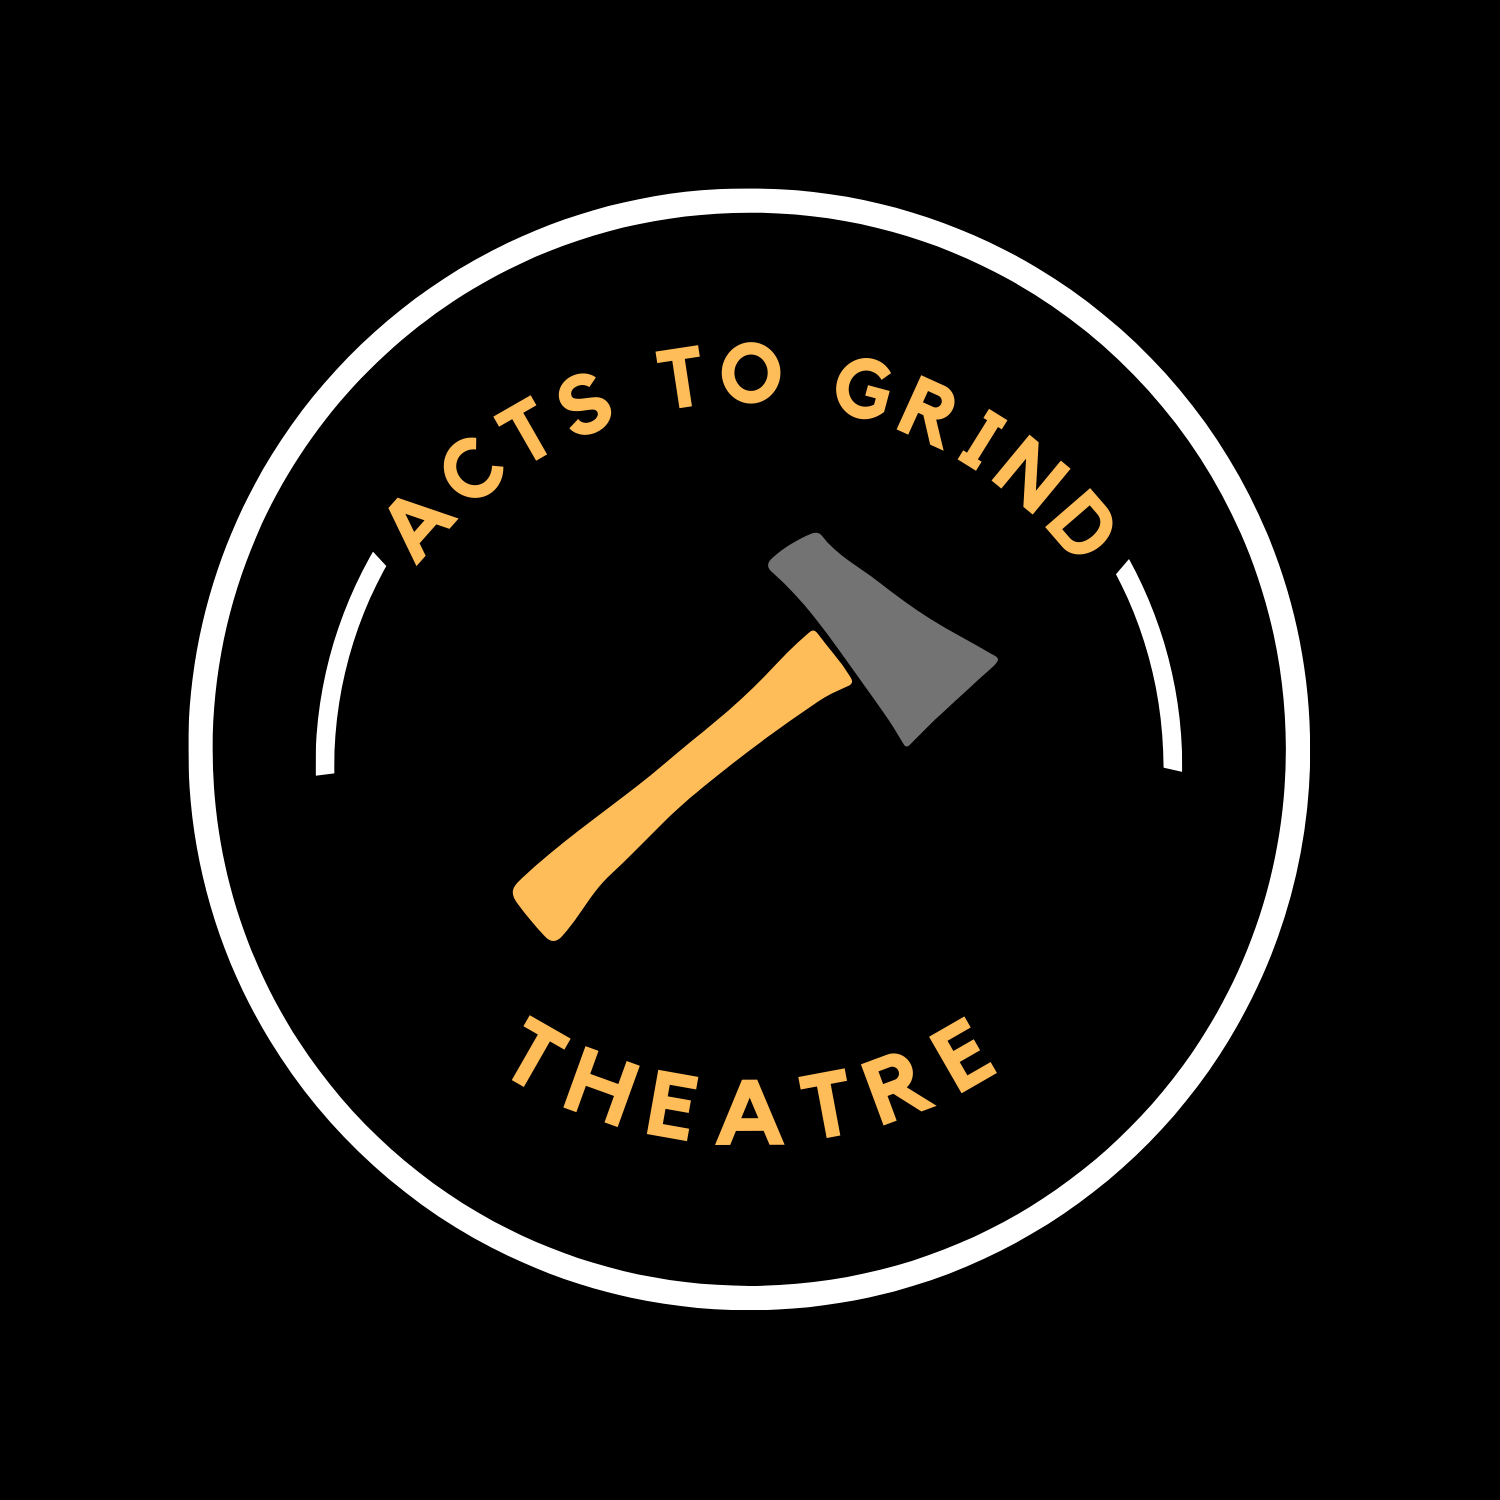 Acts To Grind Theatre